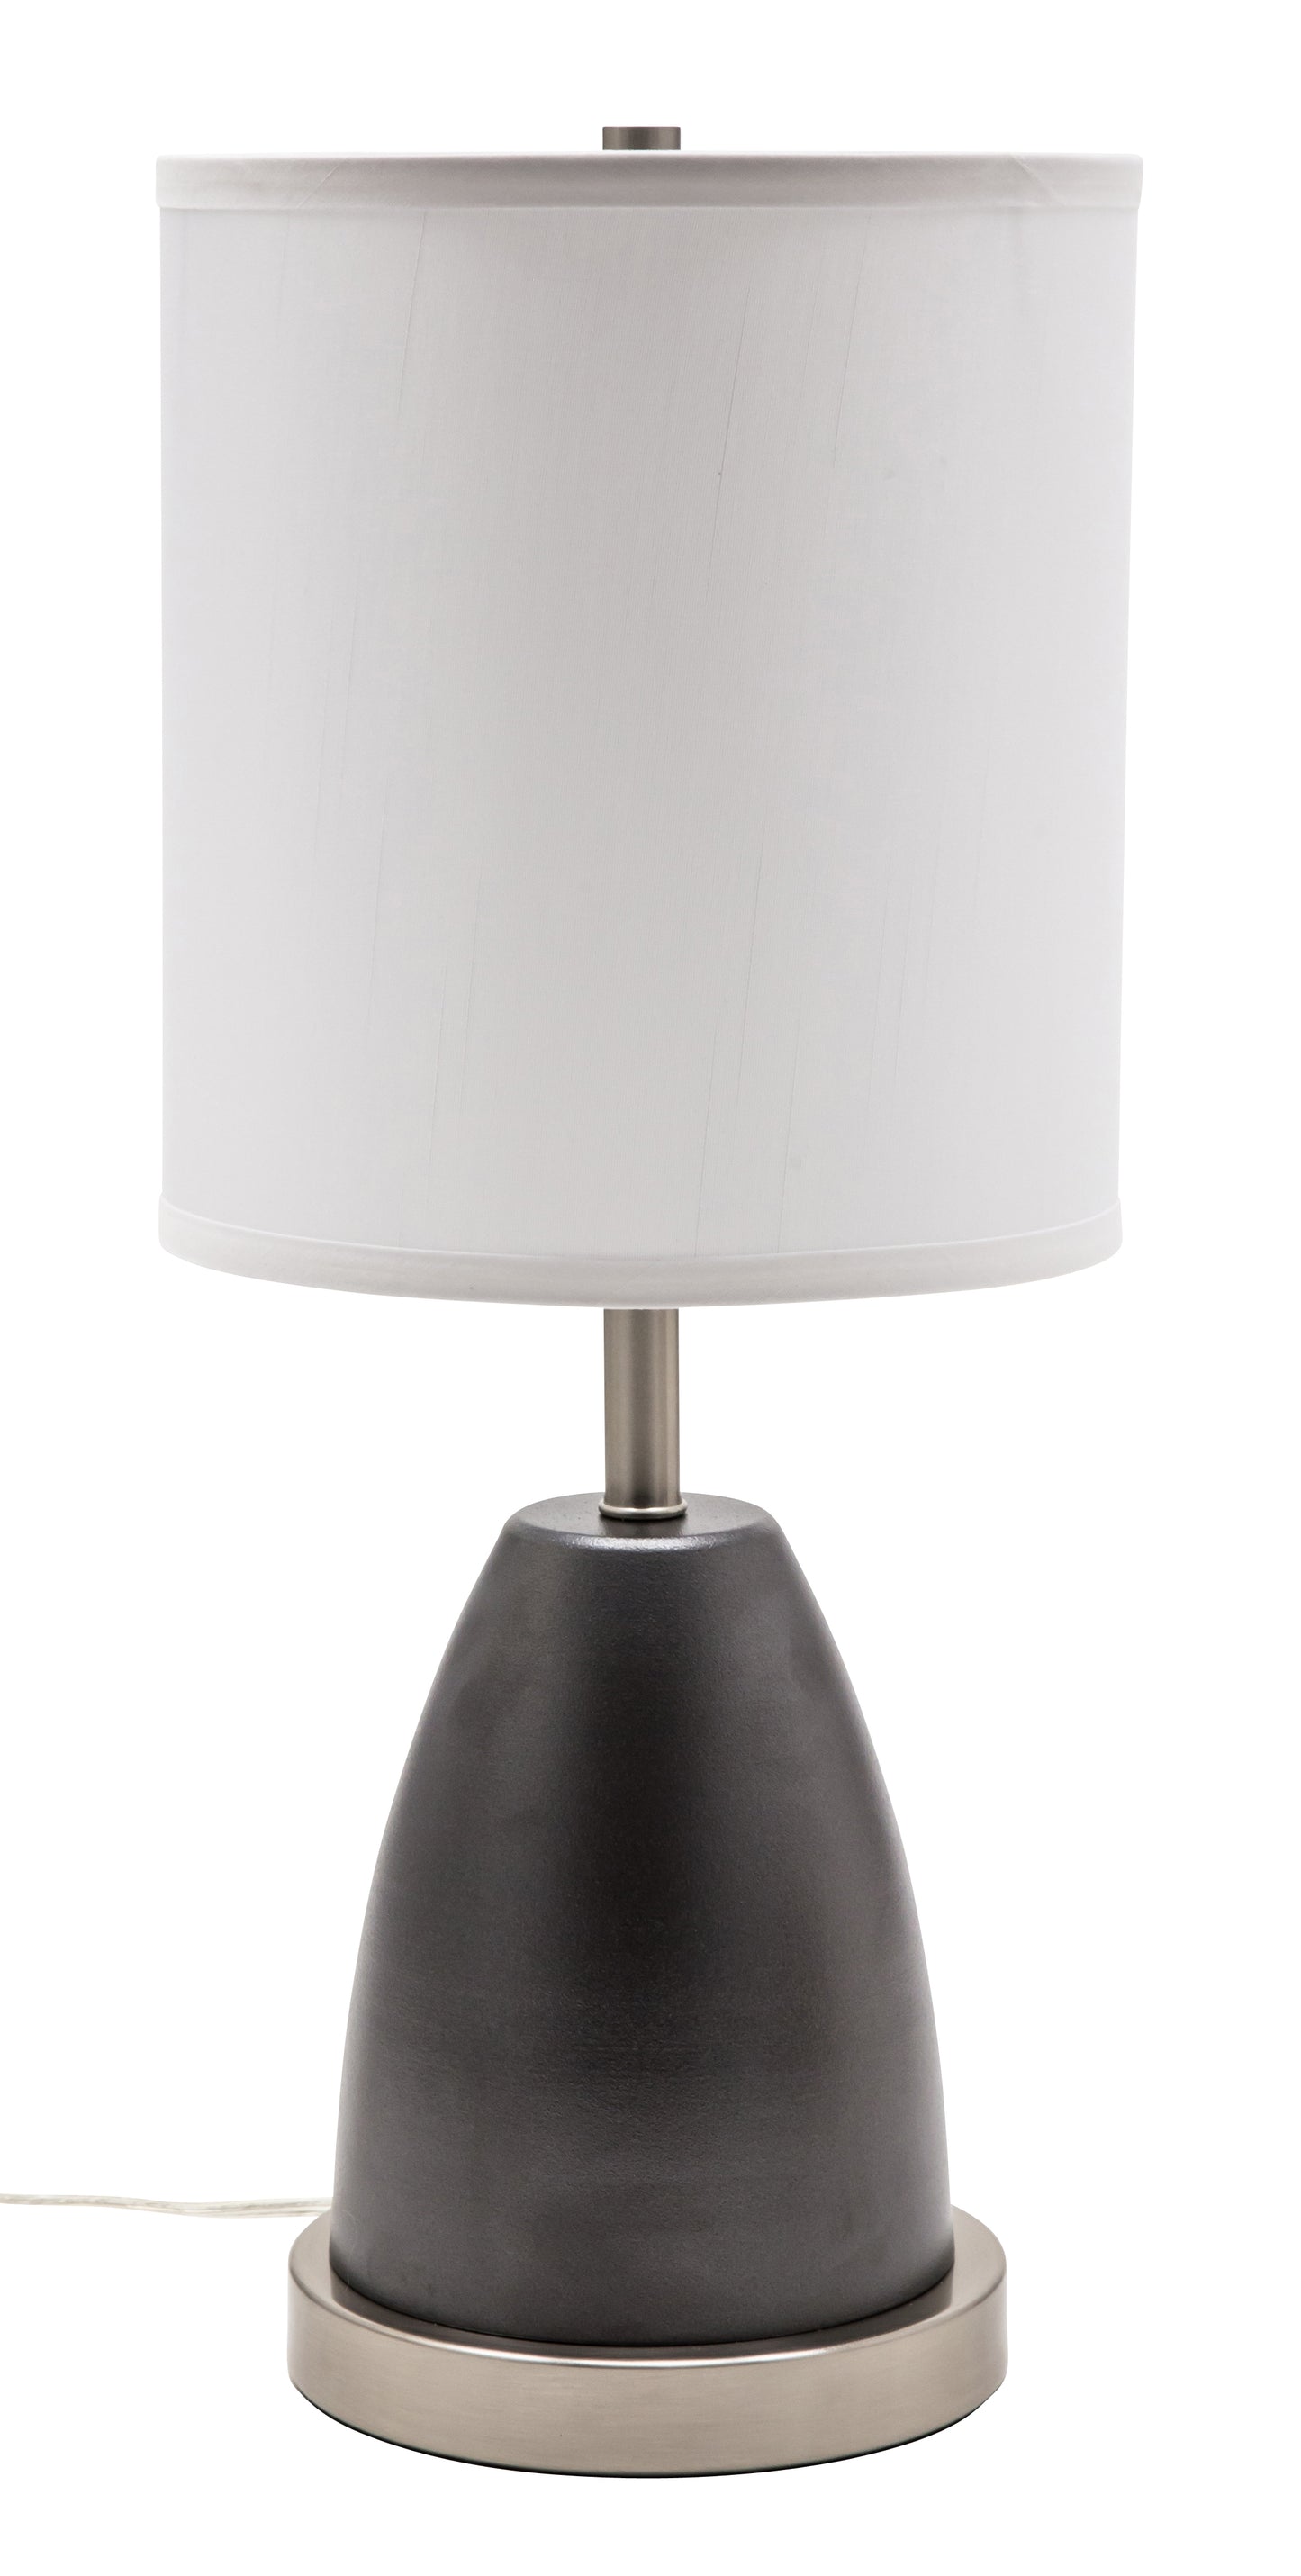 House of Troy Rupert table lamp in granite with satin nickel accents and USB port RU751-GT